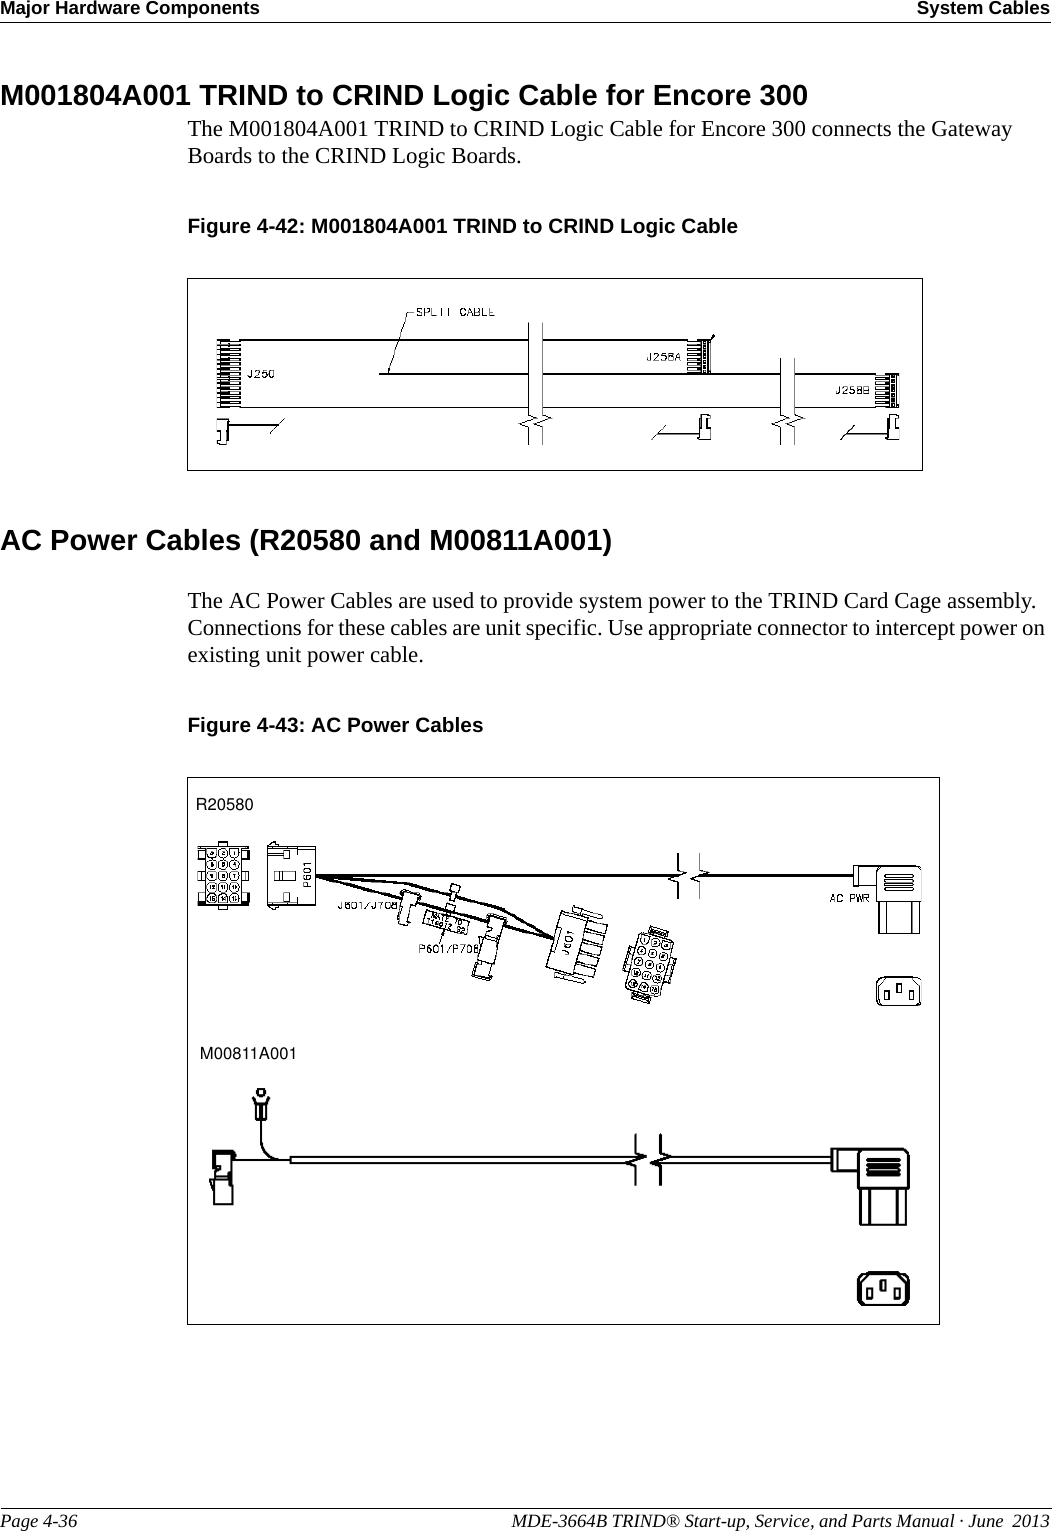 Major Hardware Components System CablesPage 4-36                                                                                                  MDE-3664B TRIND® Start-up, Service, and Parts Manual · June  2013M001804A001 TRIND to CRIND Logic Cable for Encore 300The M001804A001 TRIND to CRIND Logic Cable for Encore 300 connects the Gateway Boards to the CRIND Logic Boards.Figure 4-42: M001804A001 TRIND to CRIND Logic CableAC Power Cables (R20580 and M00811A001)The AC Power Cables are used to provide system power to the TRIND Card Cage assembly. Connections for these cables are unit specific. Use appropriate connector to intercept power on existing unit power cable.Figure 4-43: AC Power CablesR20580M00811A001